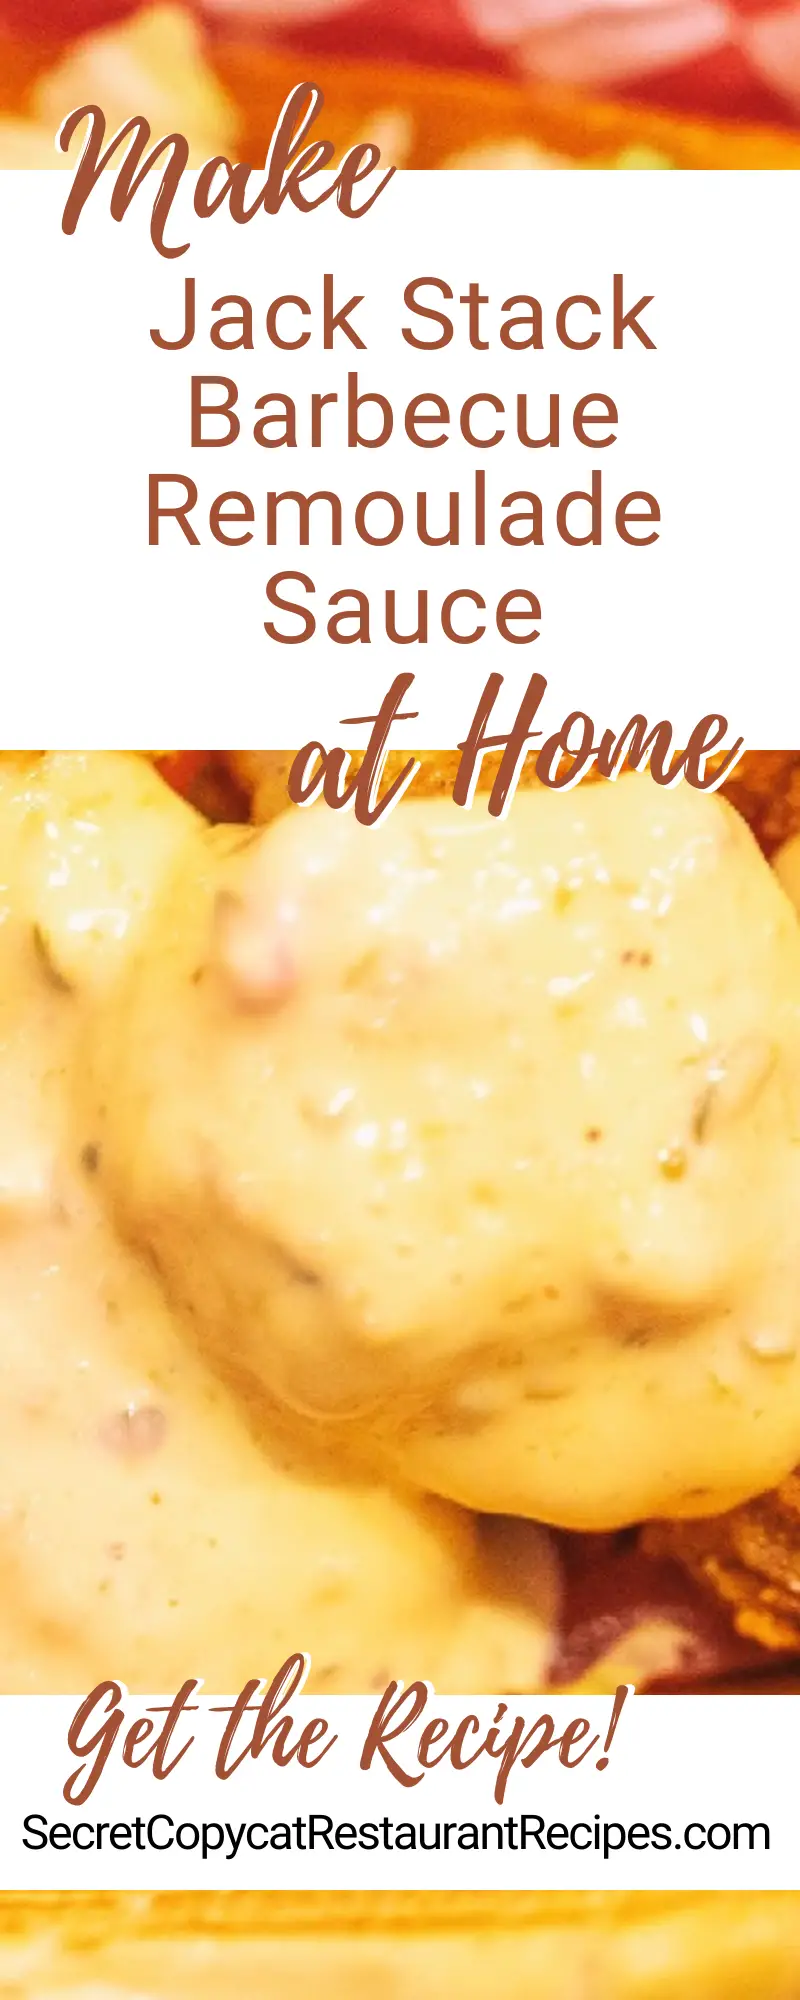 Jack Stack Barbecue Remoulade Sauce Recipe